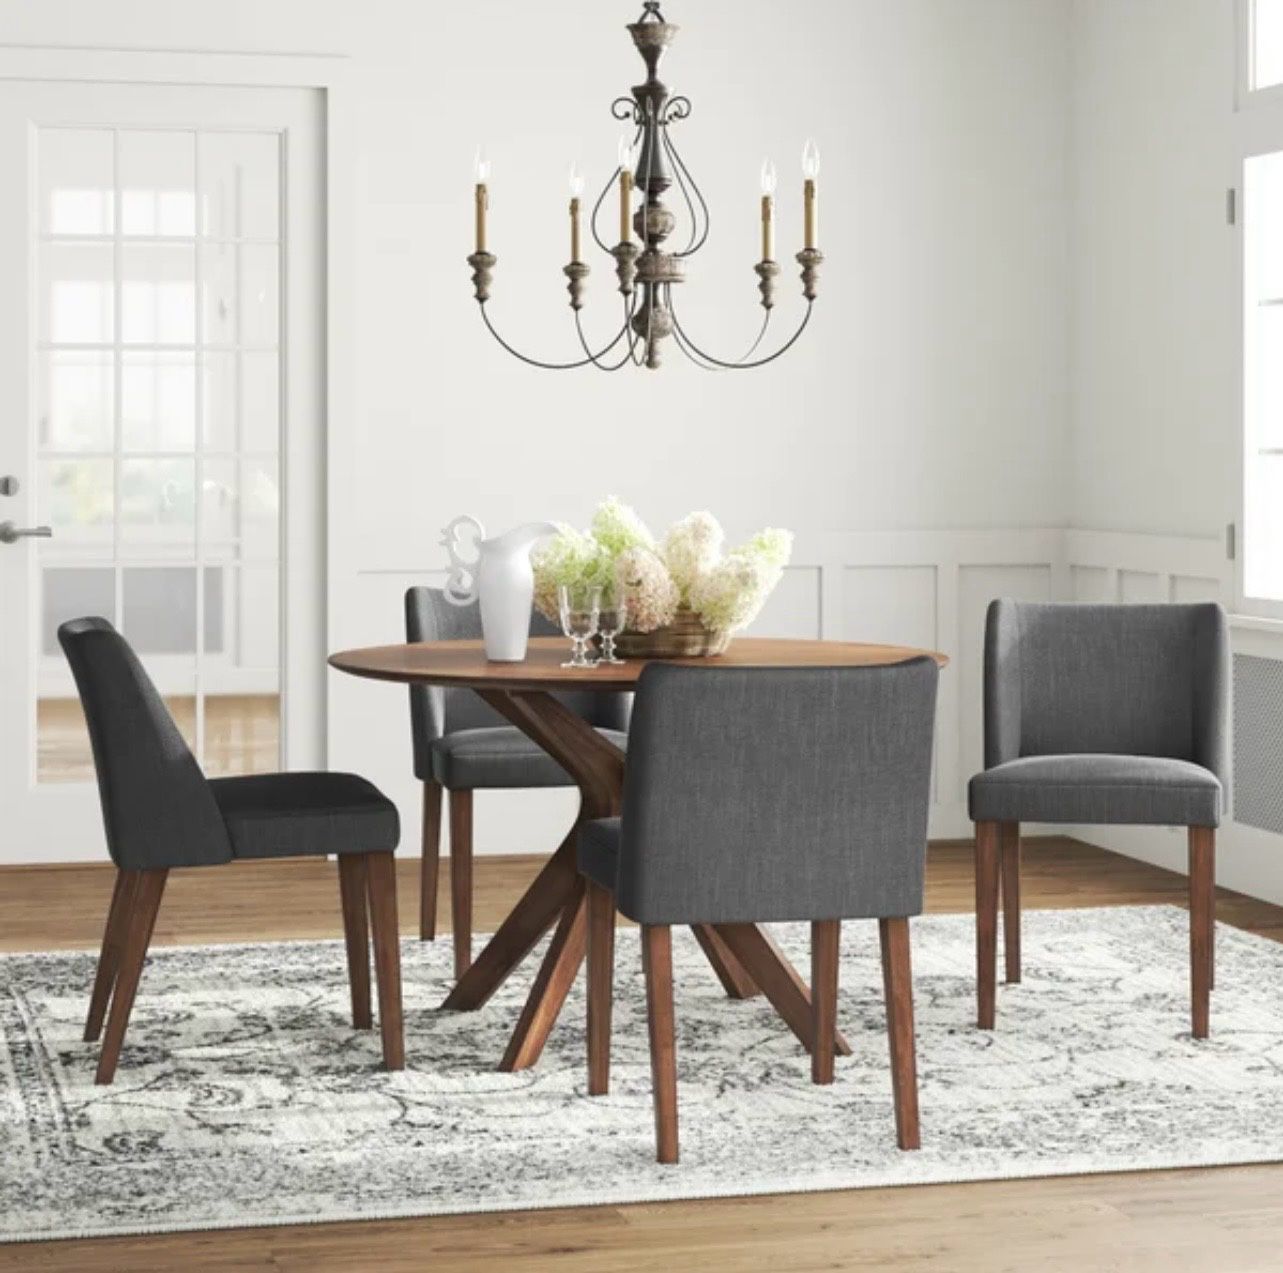 Luxury Wayfair Round Solid Wood Dining Table Set With 4 Chairs